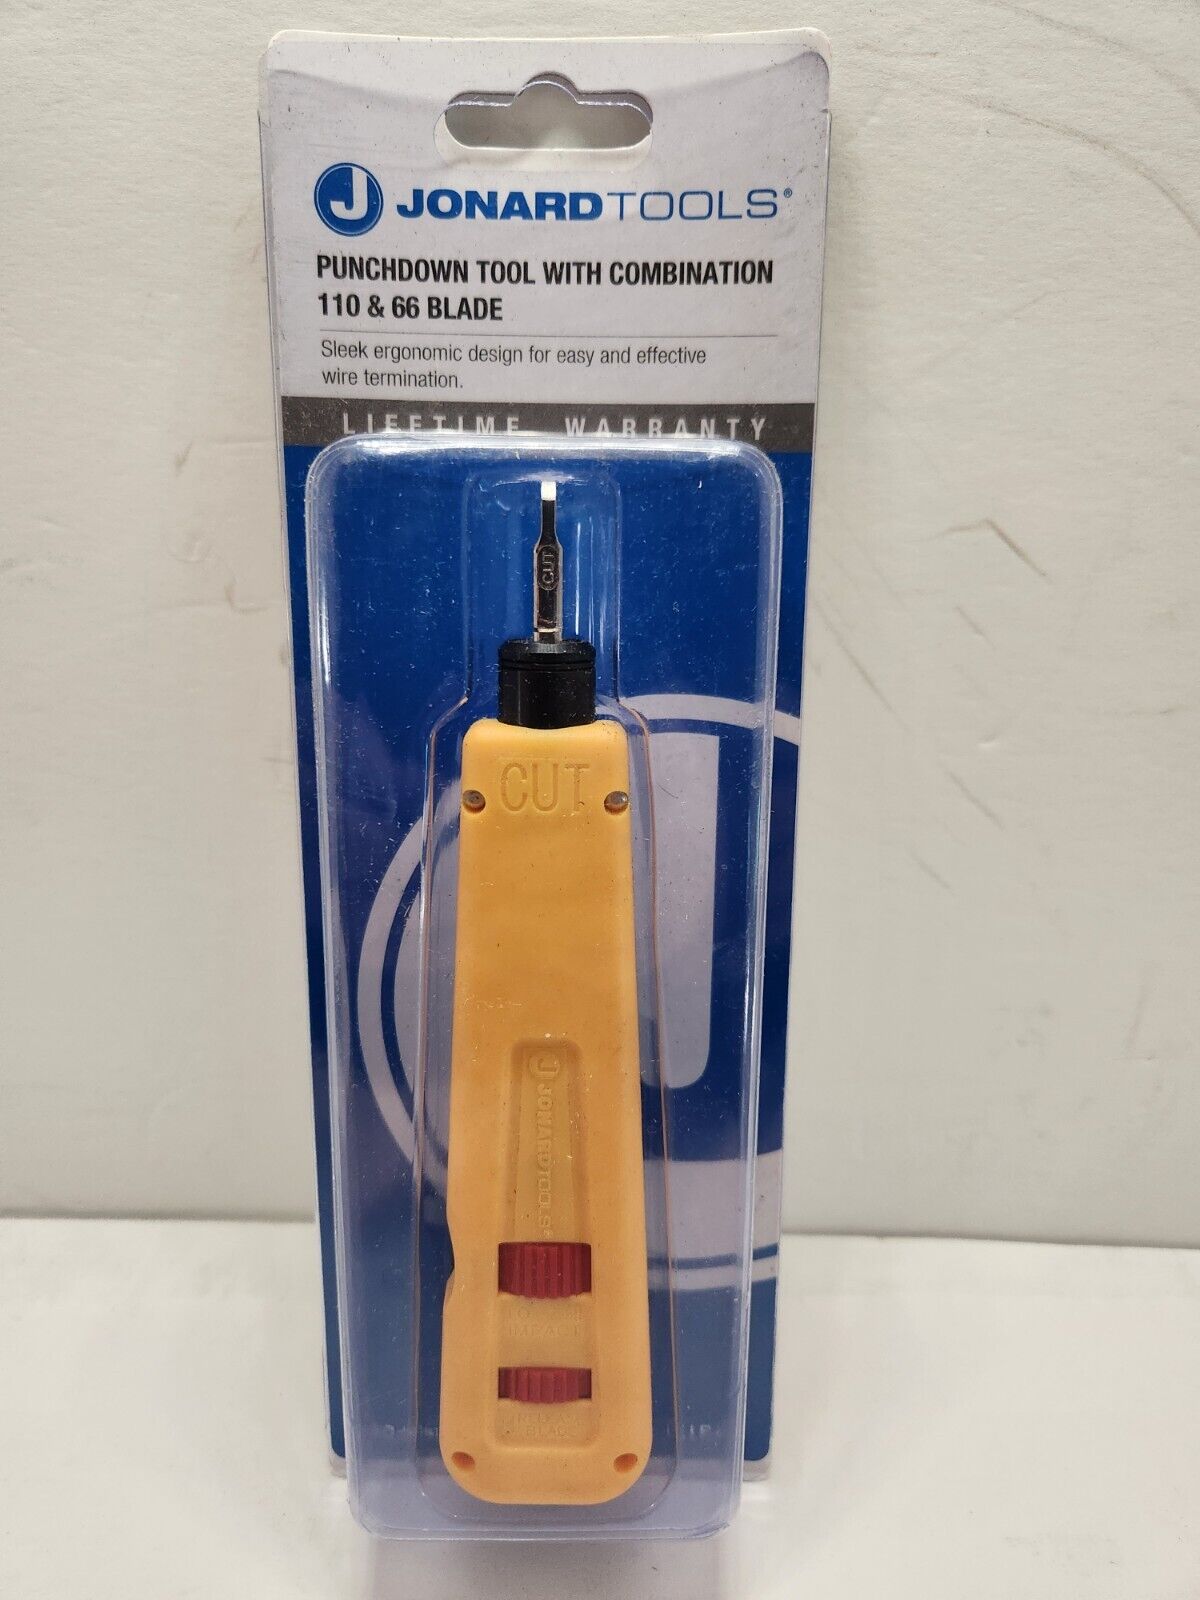 Jonard Tools - EPD-914116 - Punchdown Tool w/ 66 & 110 Combined Blade